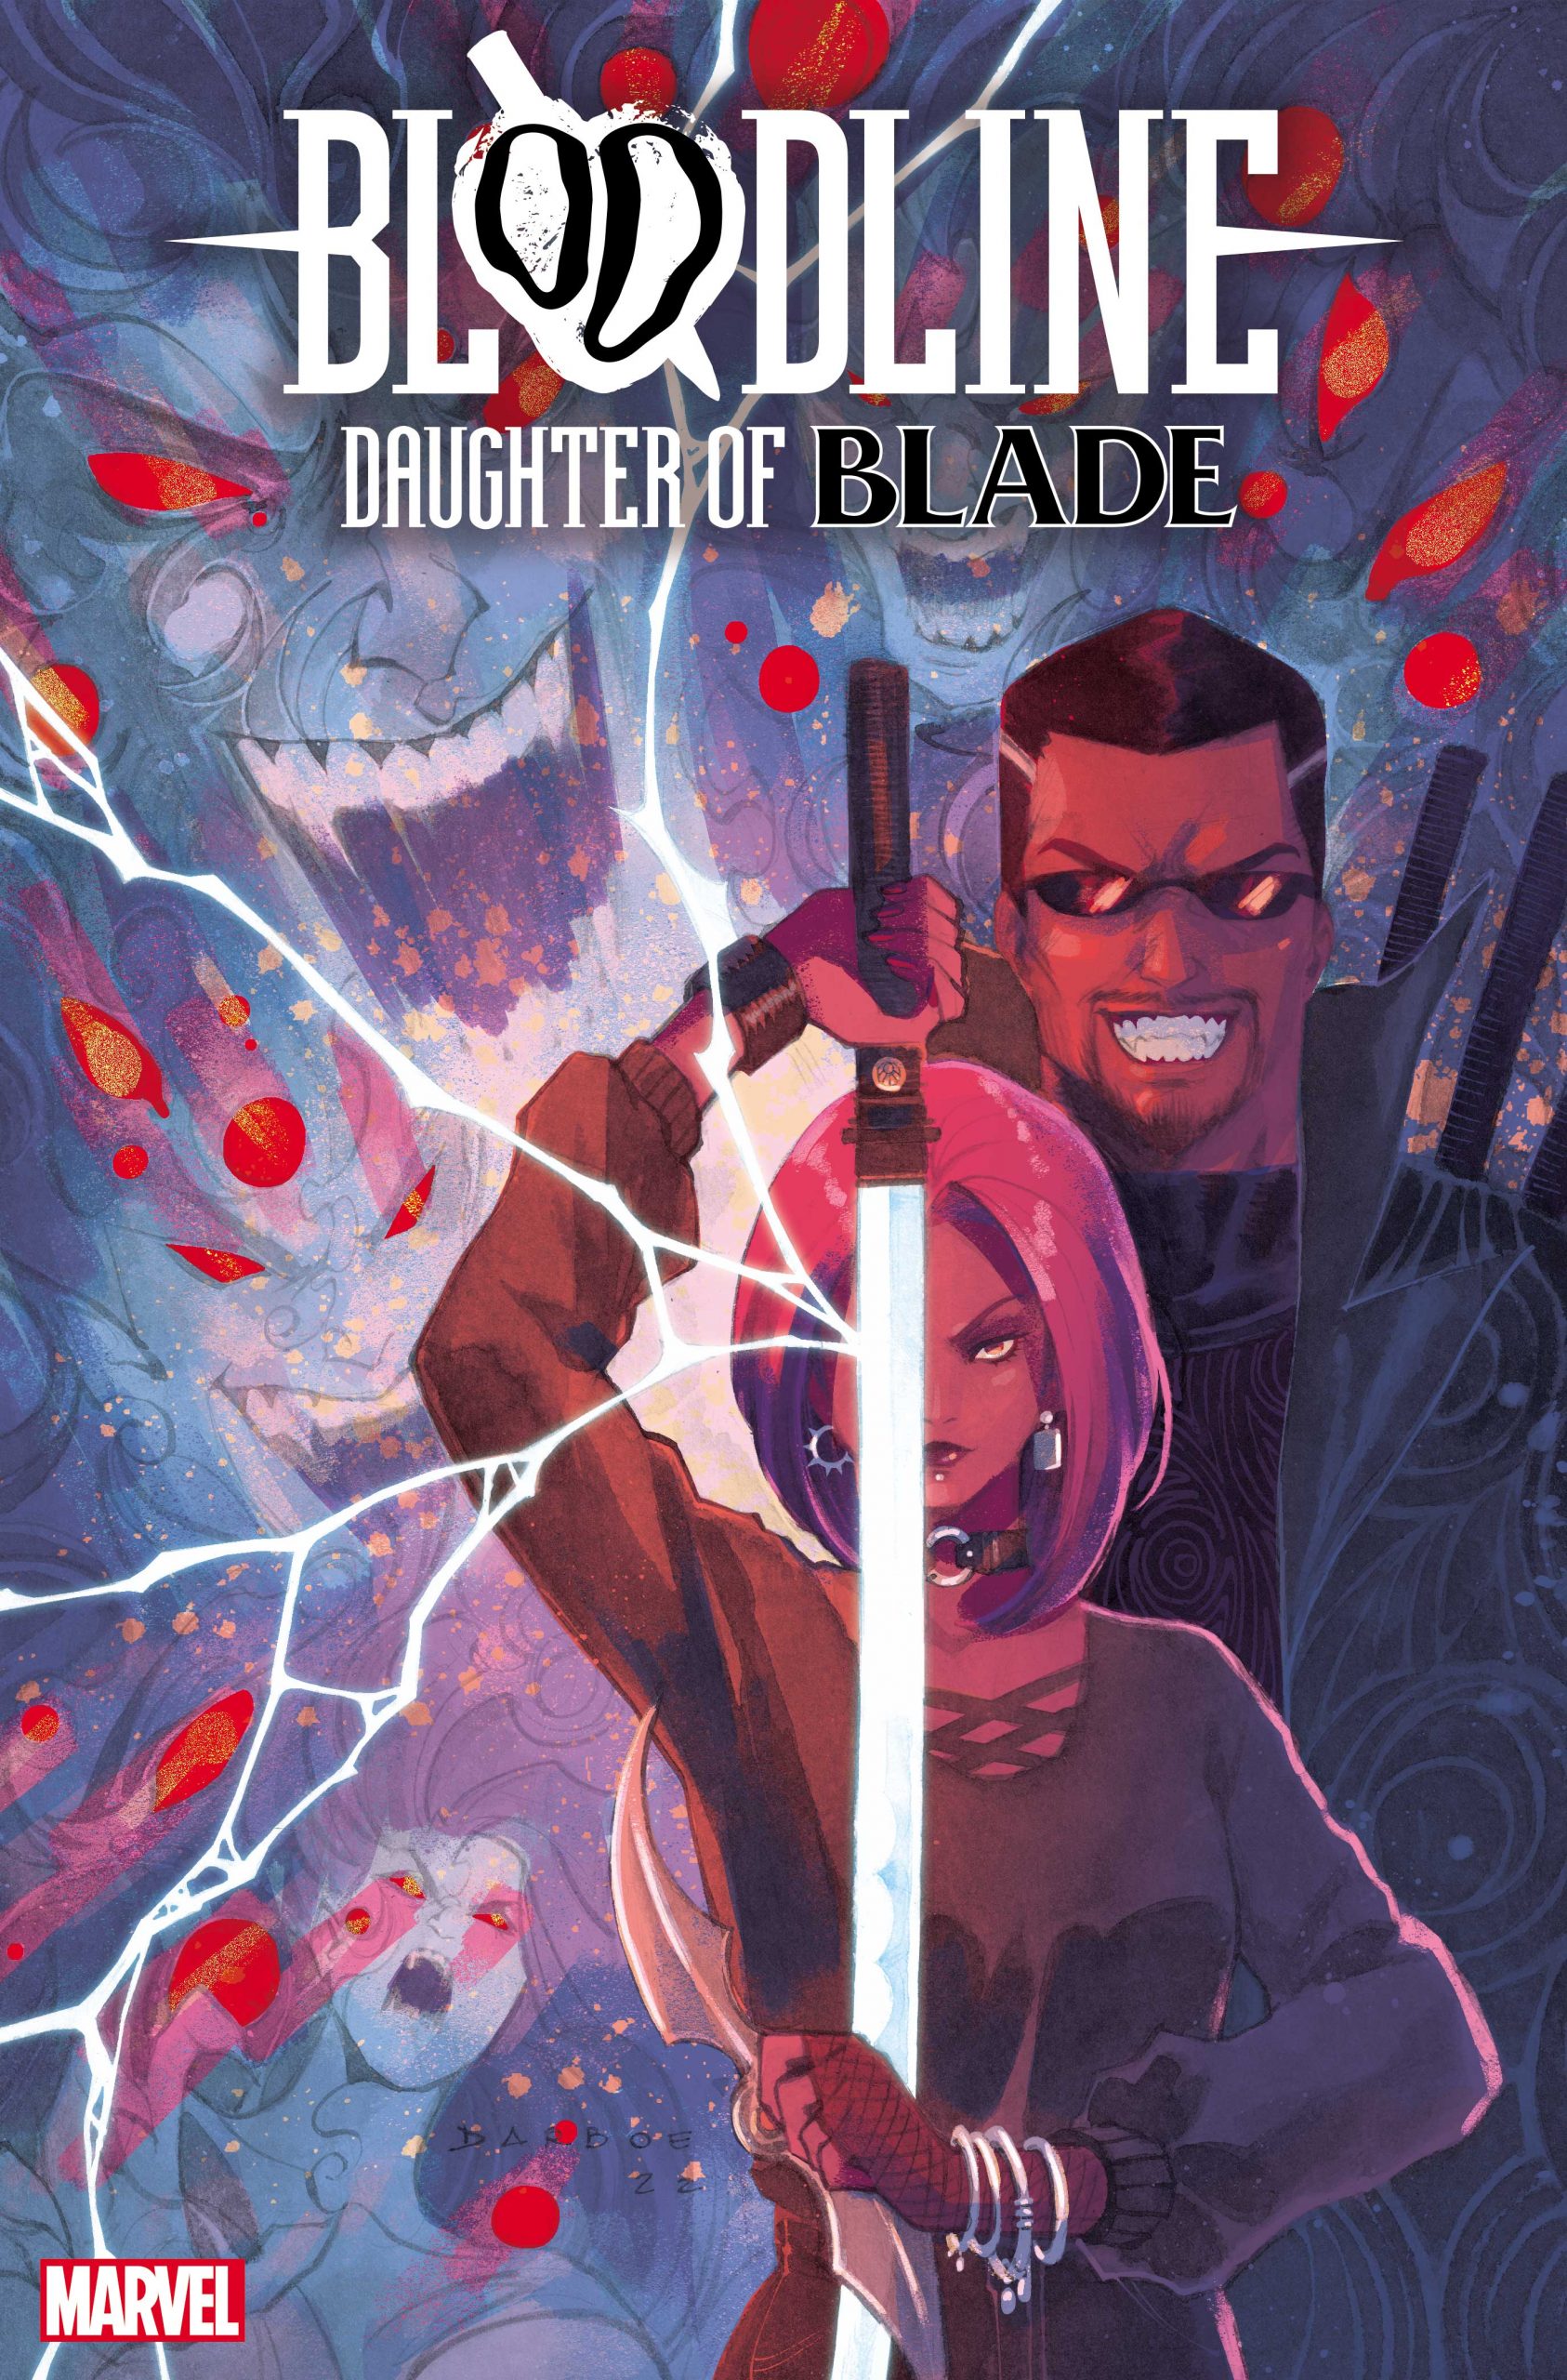 'Bloodline: Daughter of Blade' announced at NYCC for February 2023